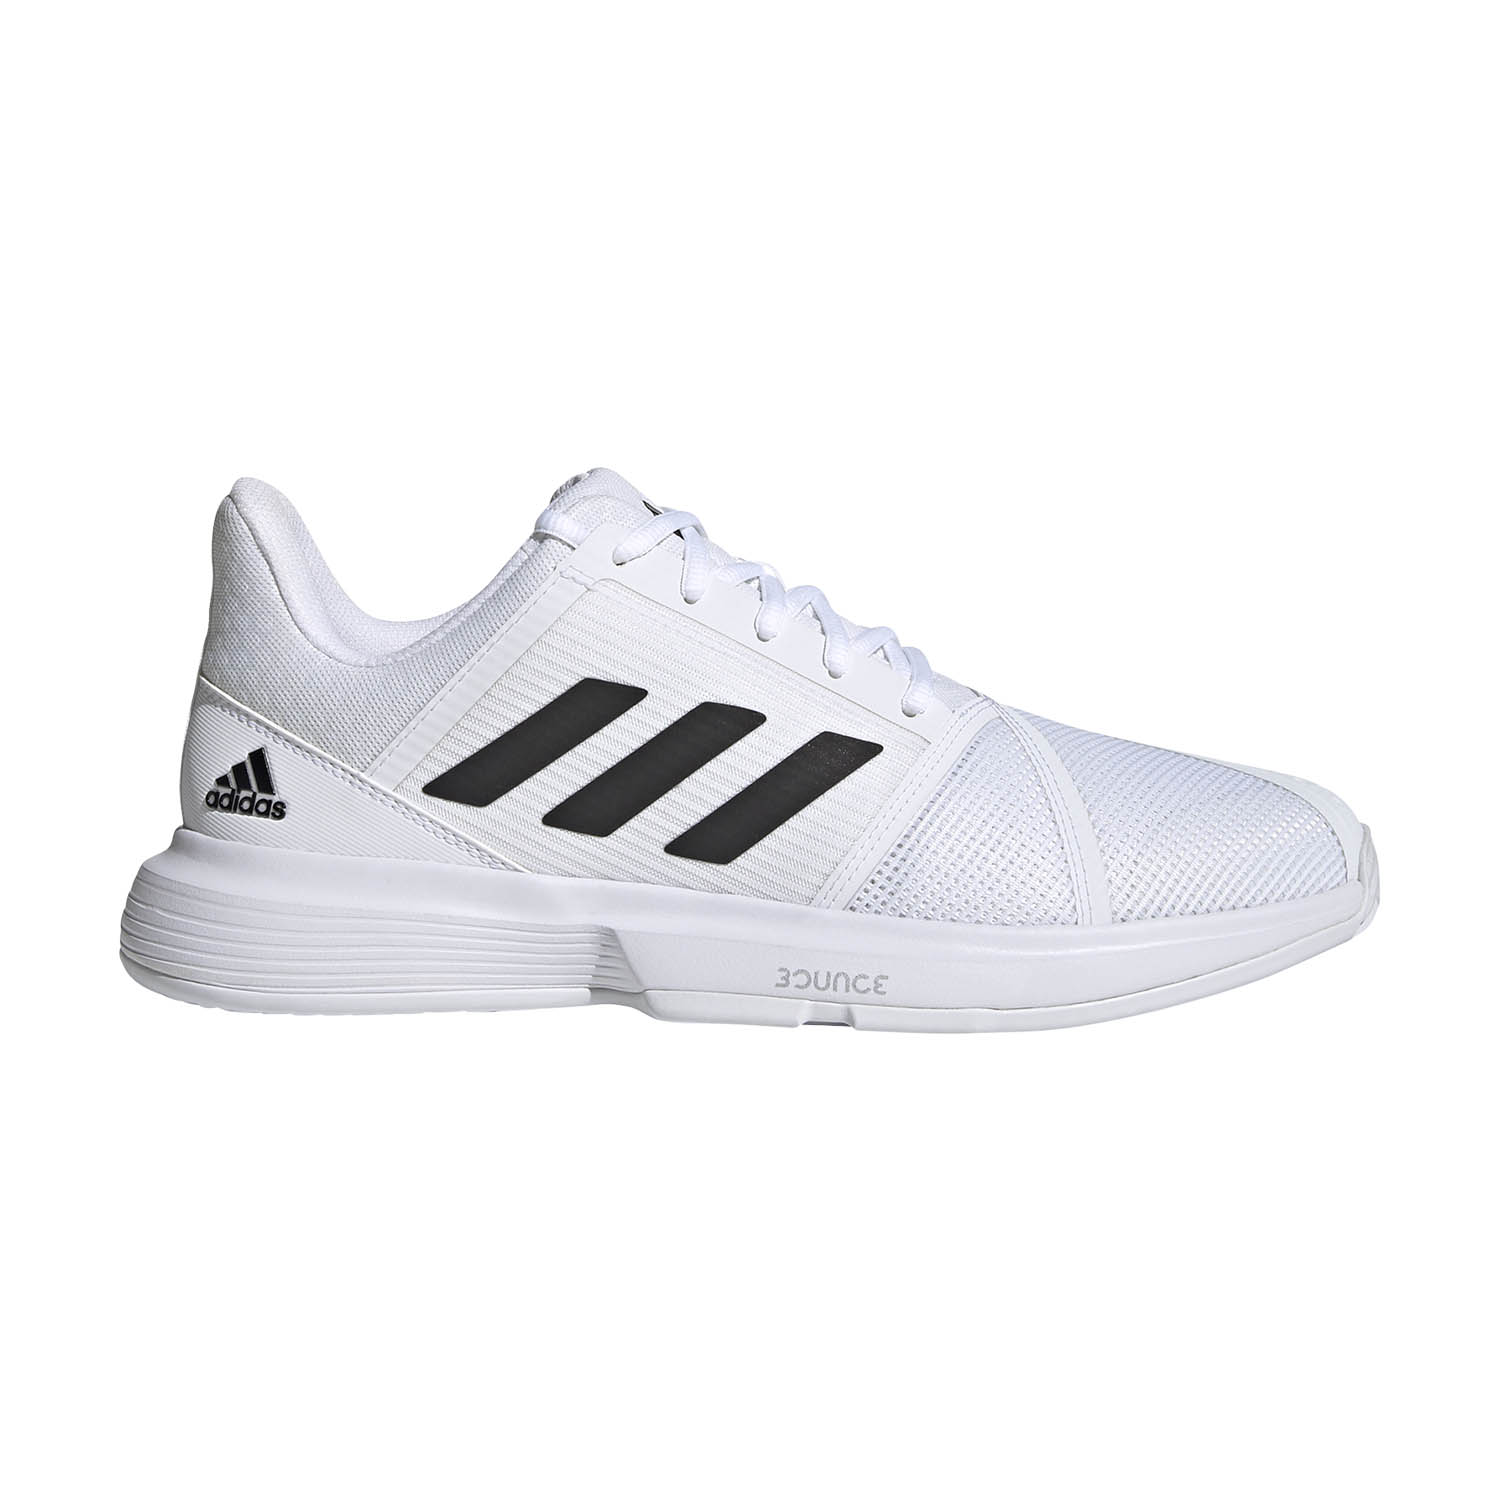 adidas CourtJam Bounce - Ftwr White/Core Black/Silver Met